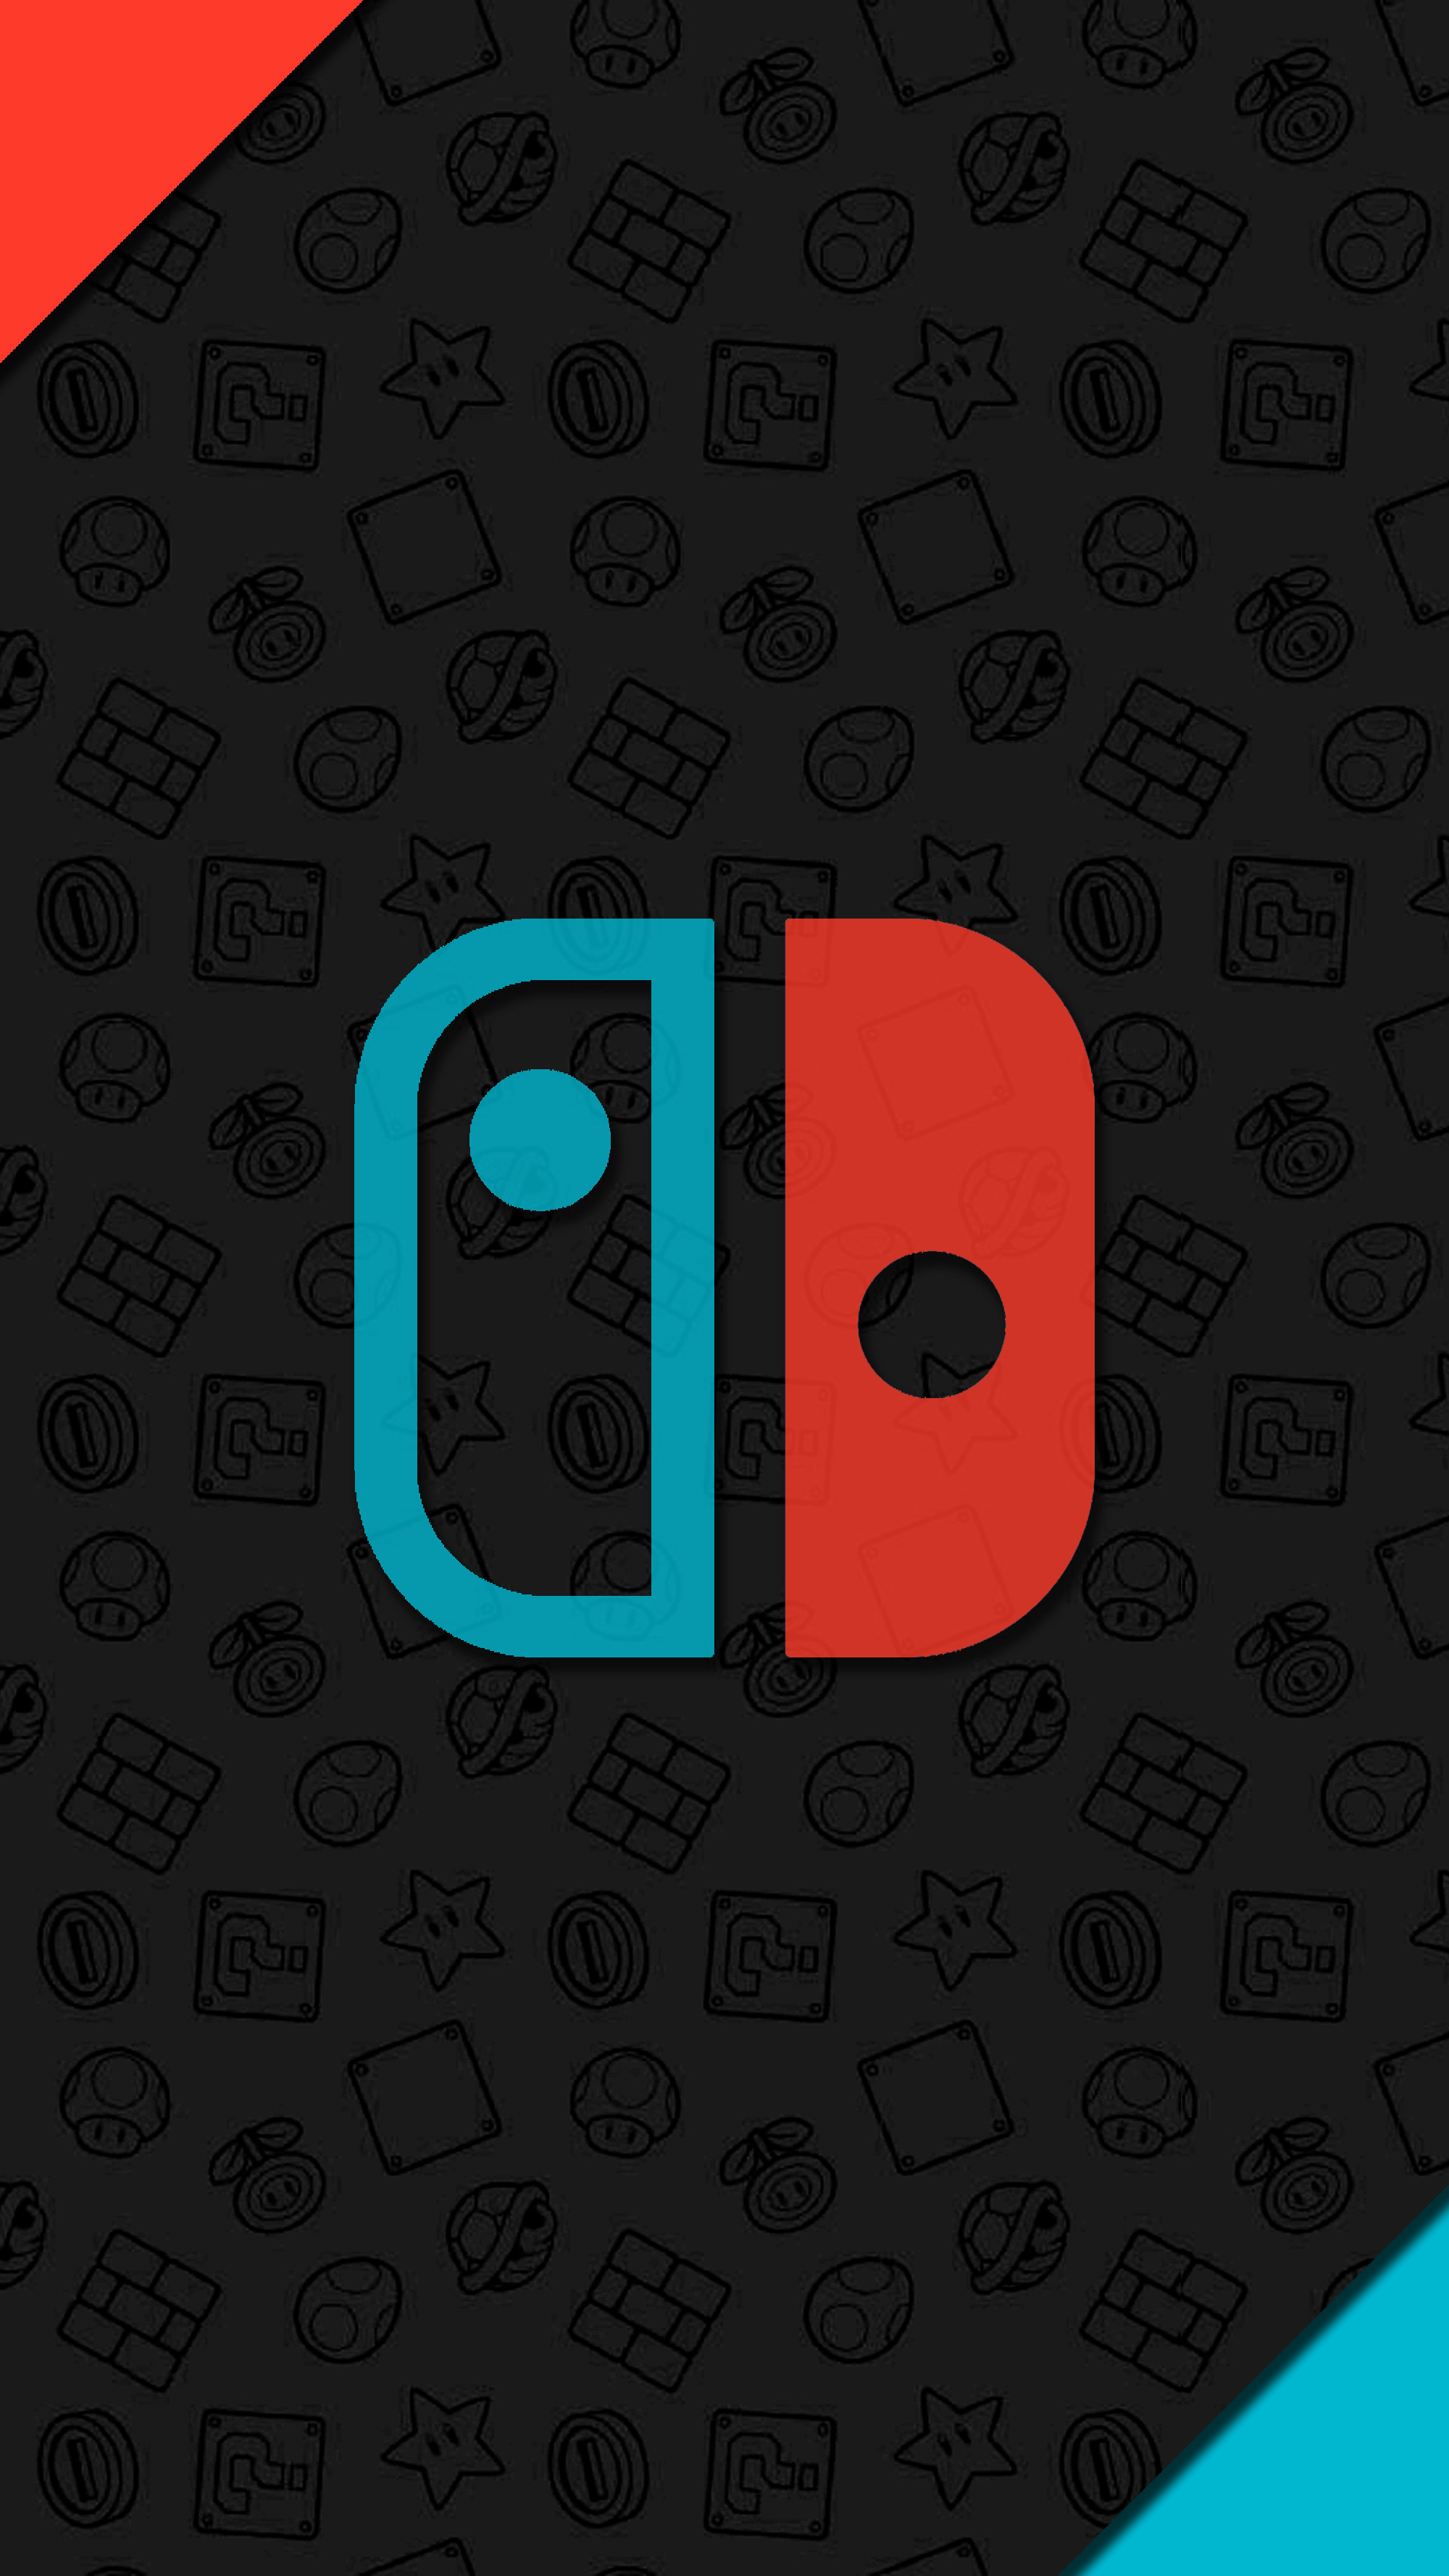 Nintendo Switch Wallpaper for your phone High rez